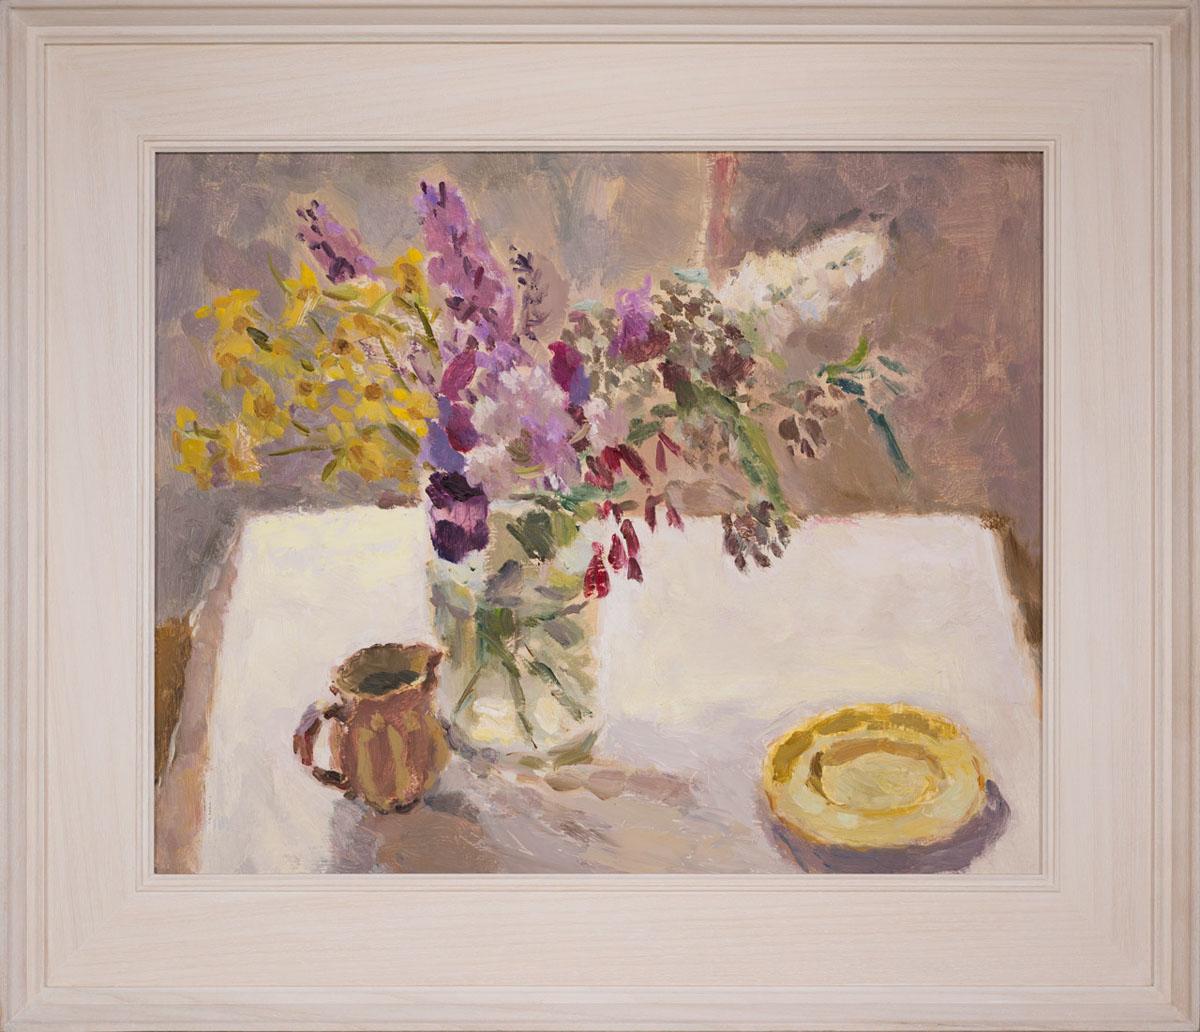 Buddleia with Yellow Flowers and Saucer BY LYNNE CARTLIDGE, Contemporary Art (Gelb), Still-Life Painting, von Lynne Cartlidge